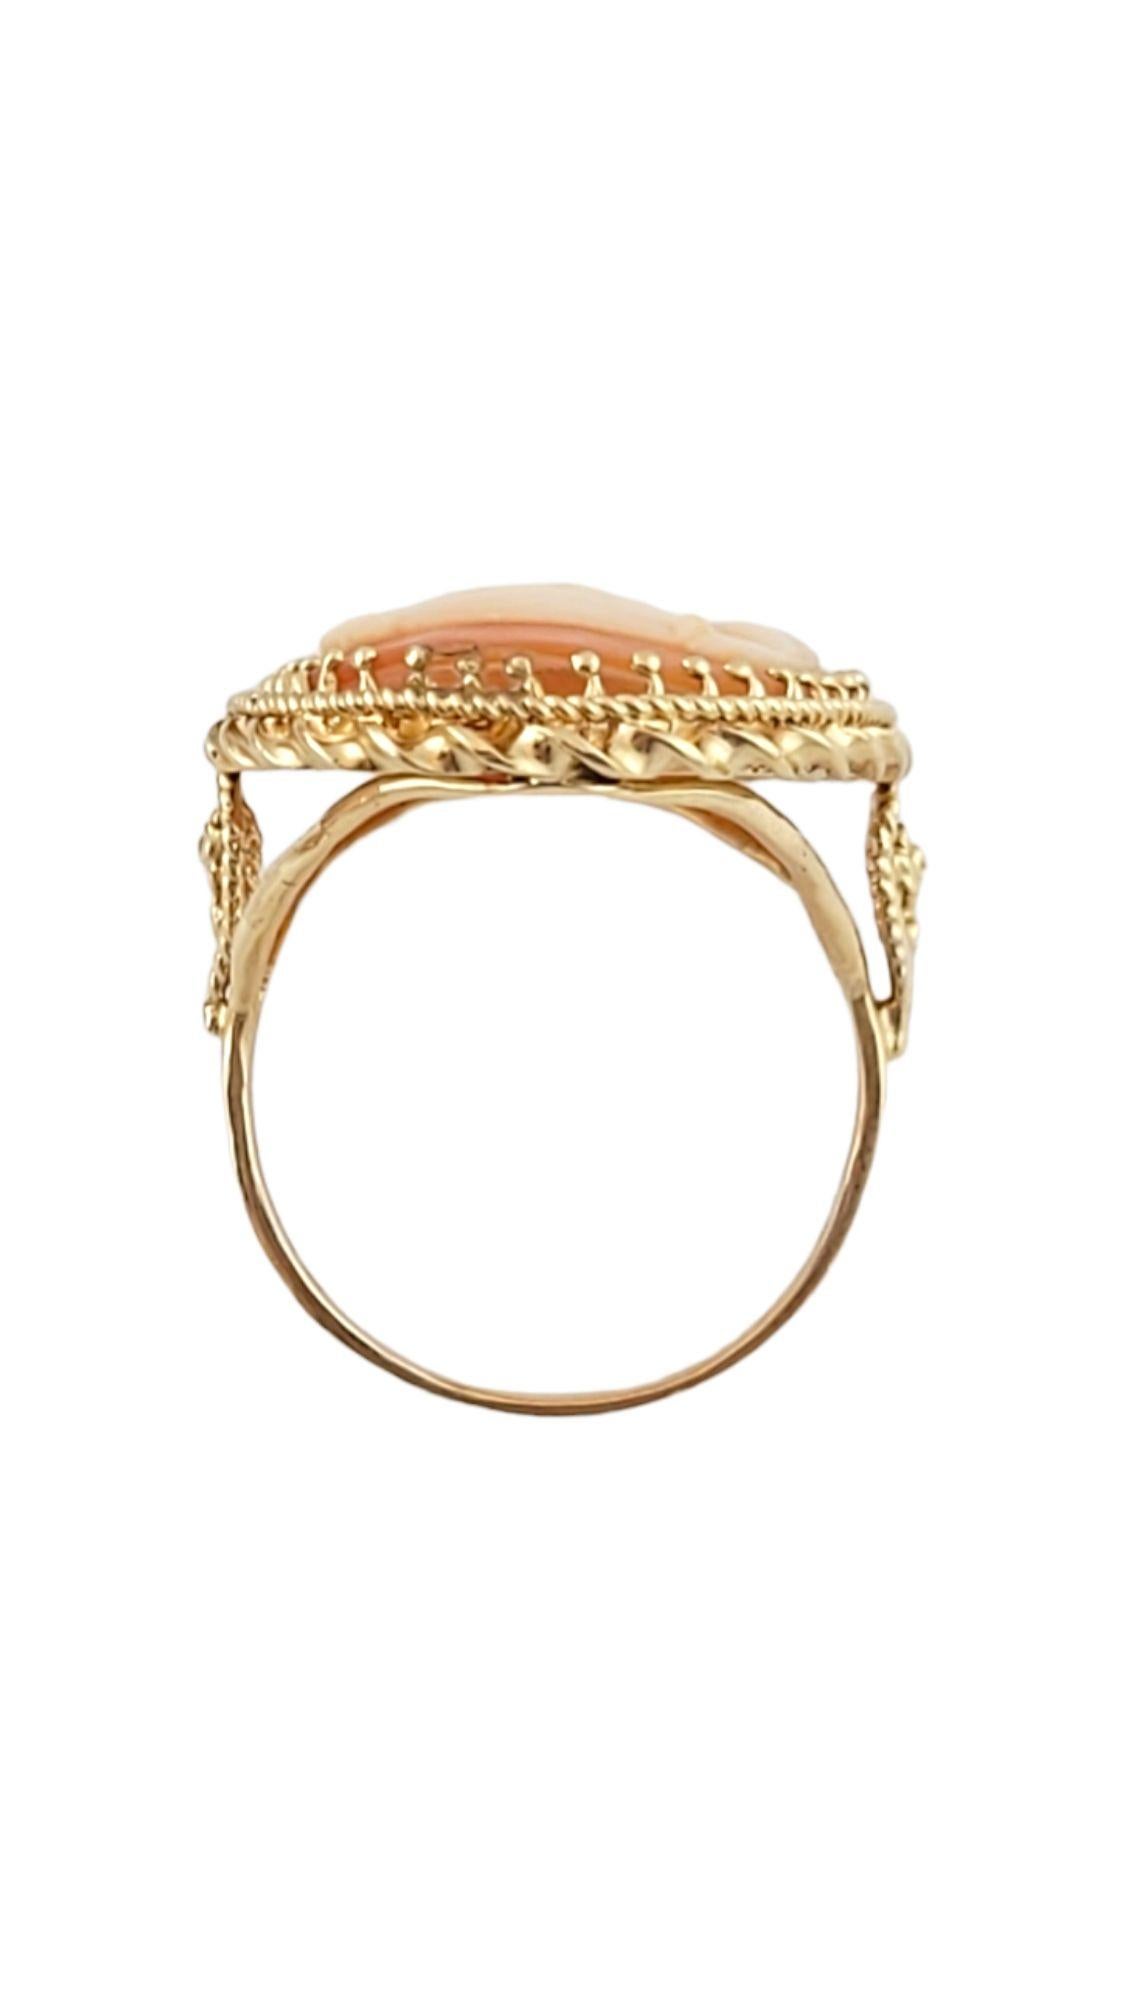 10K Yellow Gold Cameo Ring Size 8 3/4 #14571 In Good Condition For Sale In Washington Depot, CT